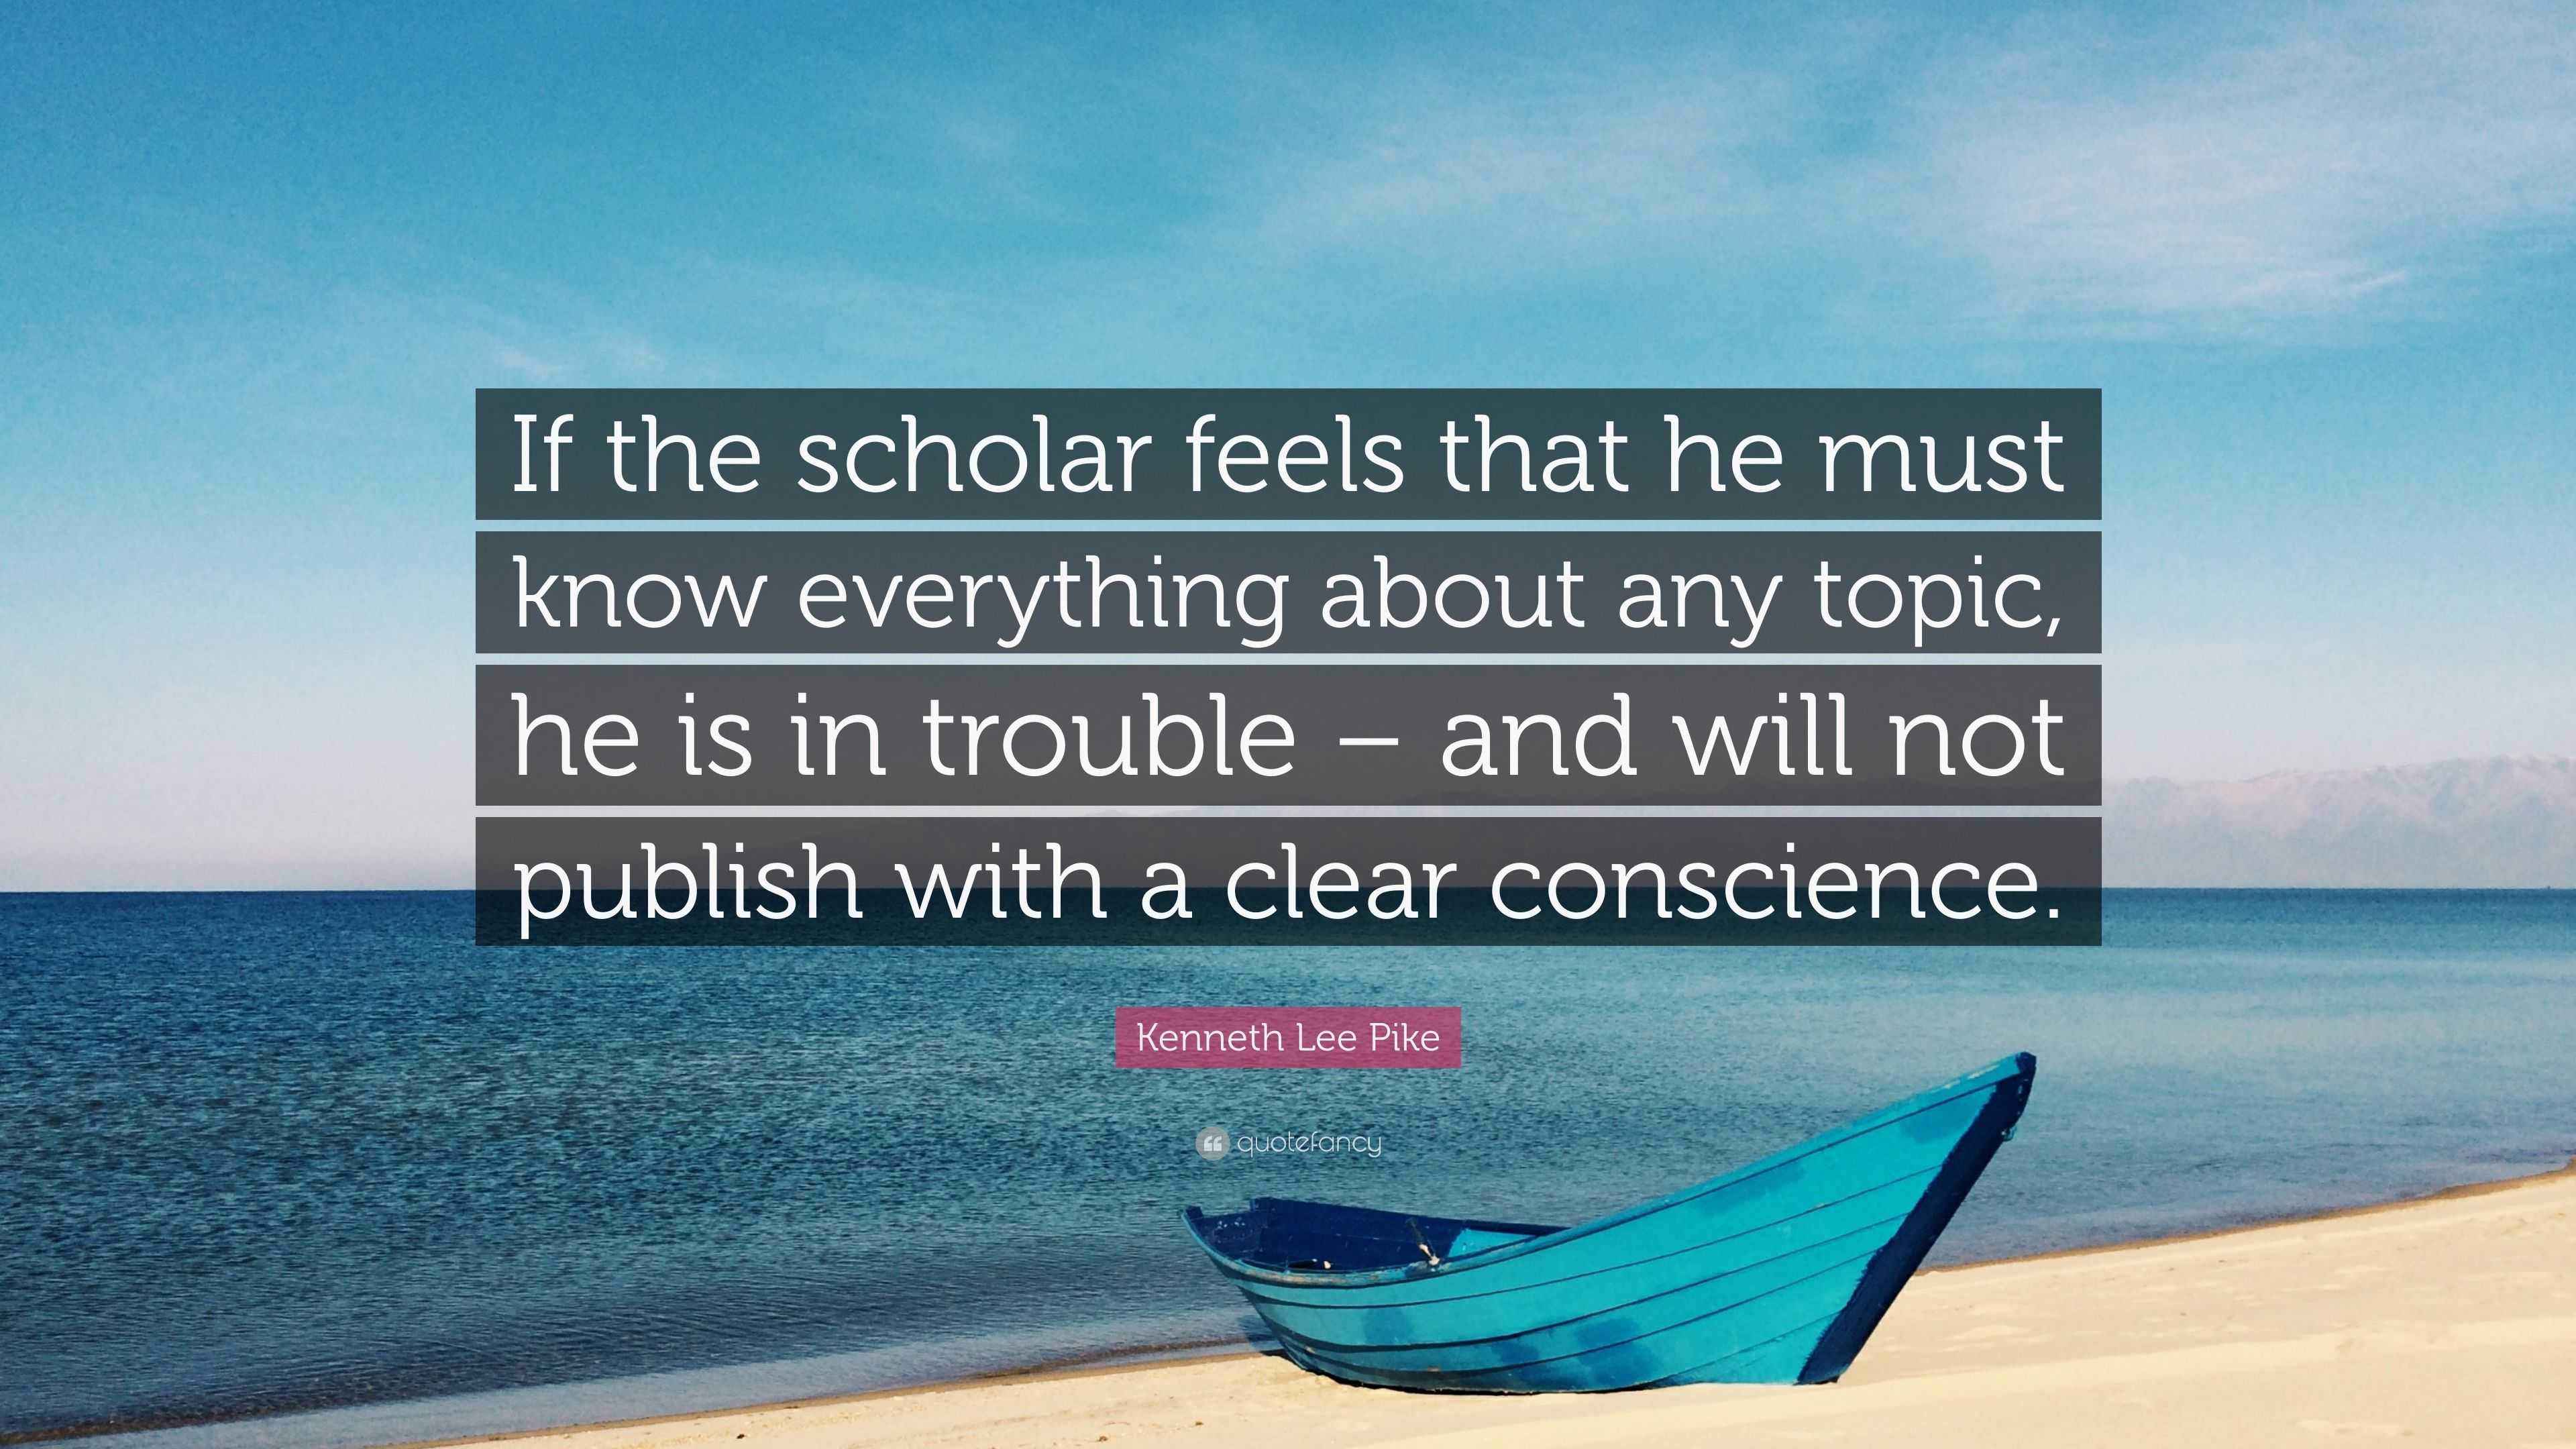 Kenneth Lee Pike Quote: “If the scholar feels that he must know ...